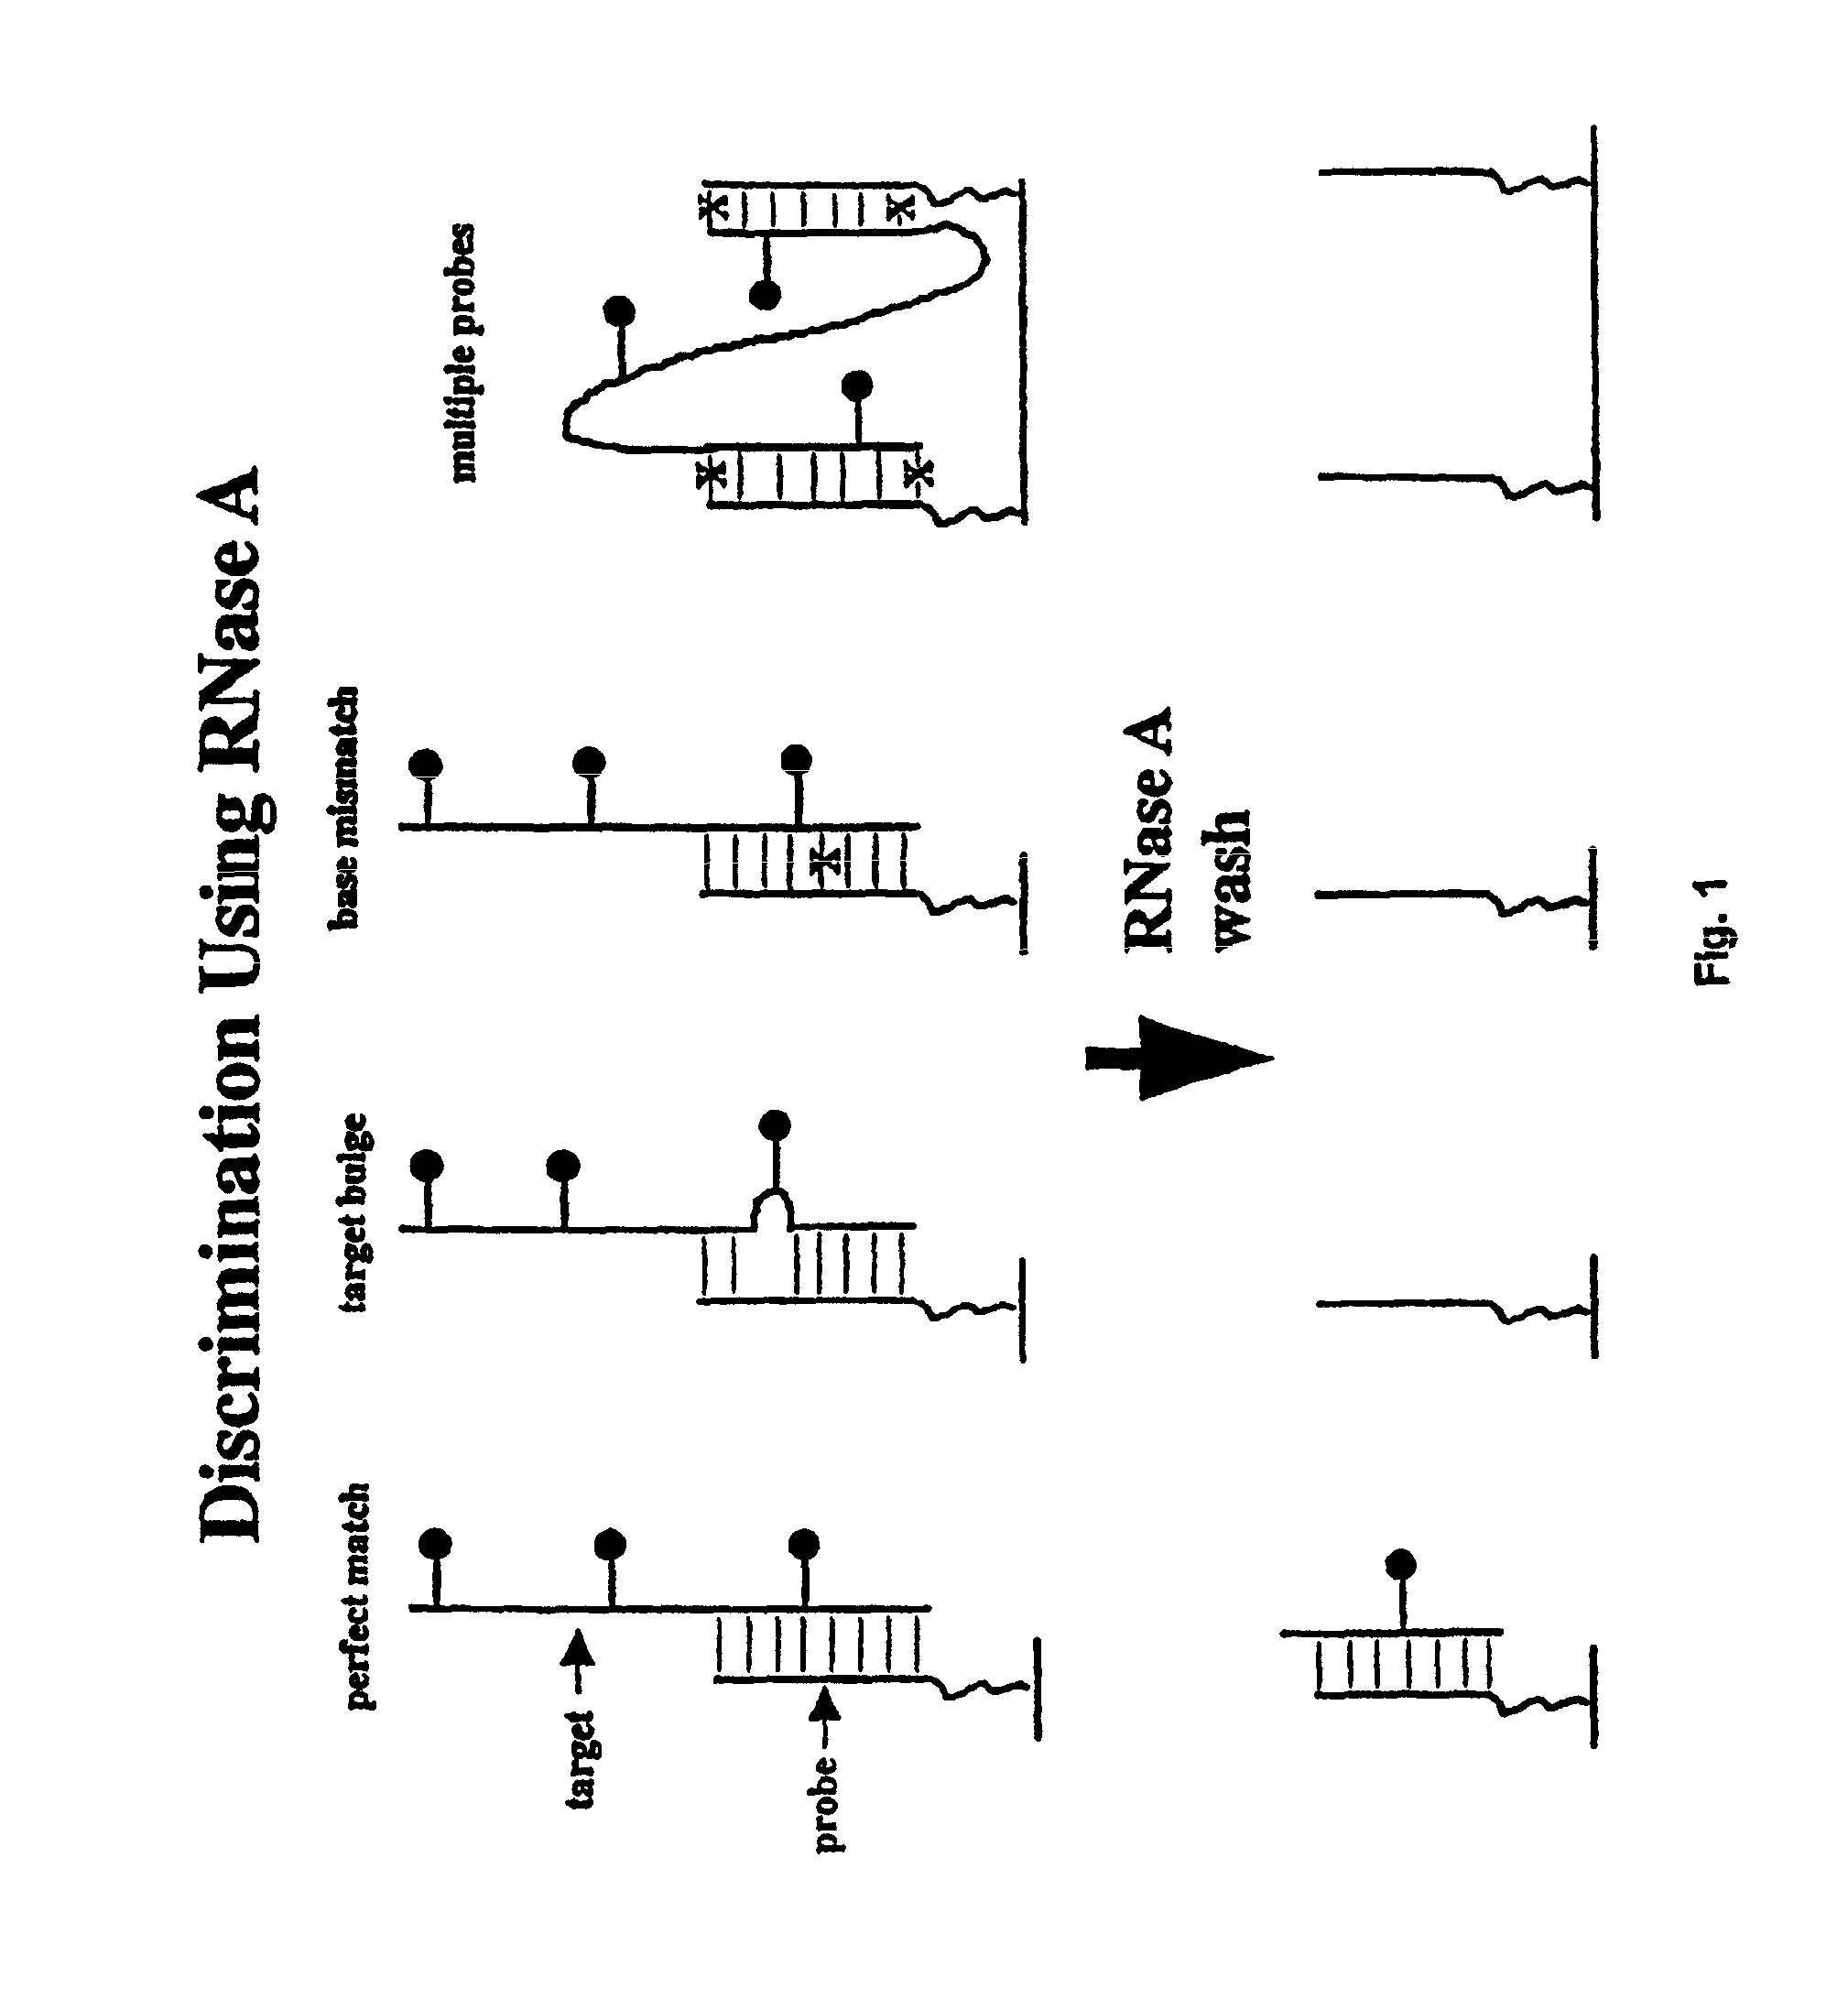 Methods of enzymatic discrimination enhancement and surface-bound double-stranded DNA